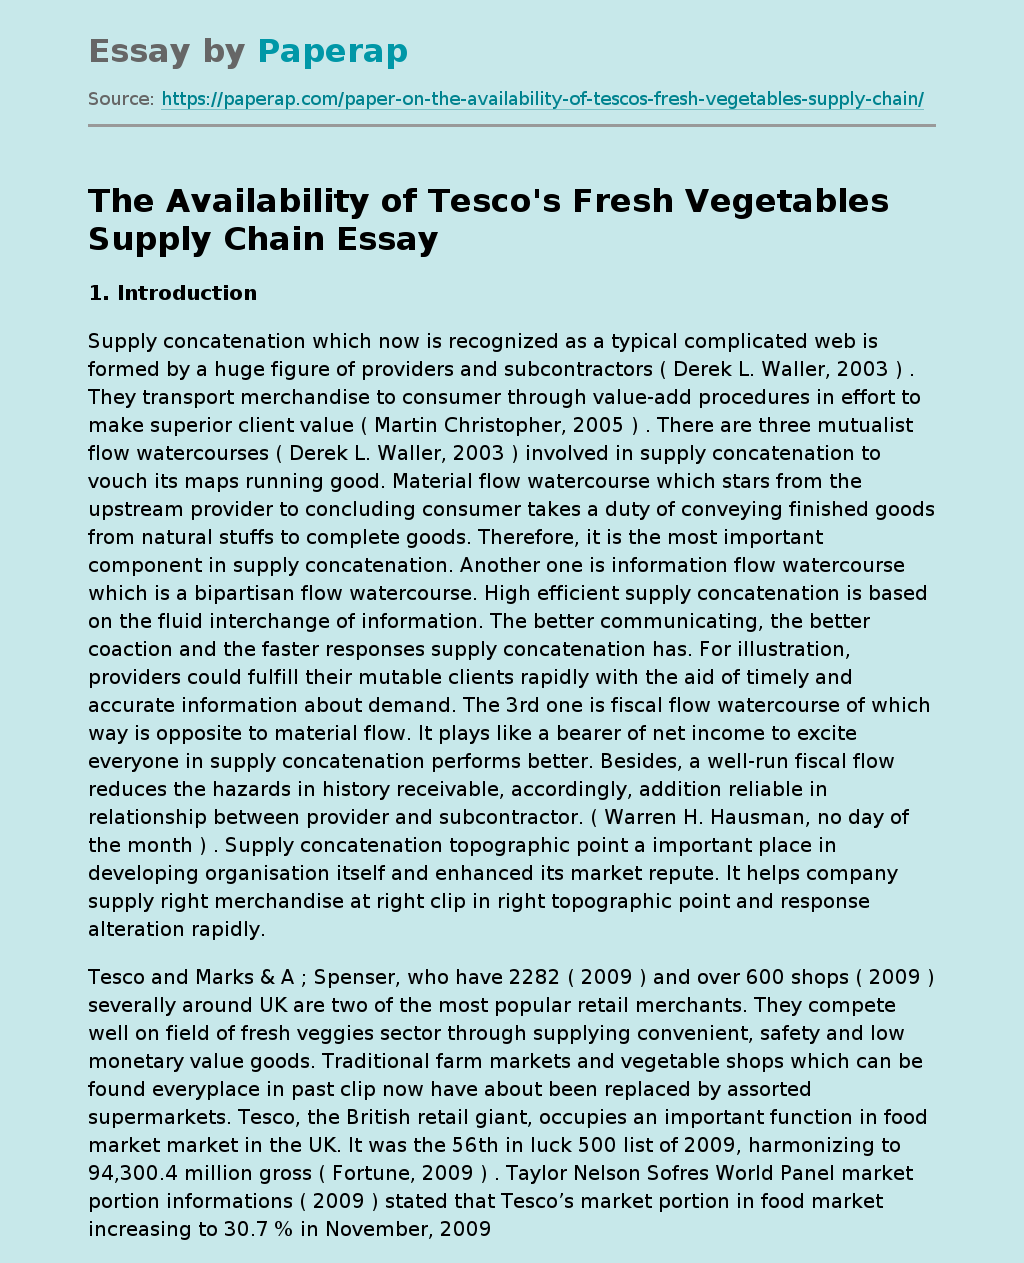 The Availability of Tesco's Fresh Vegetables Supply Chain